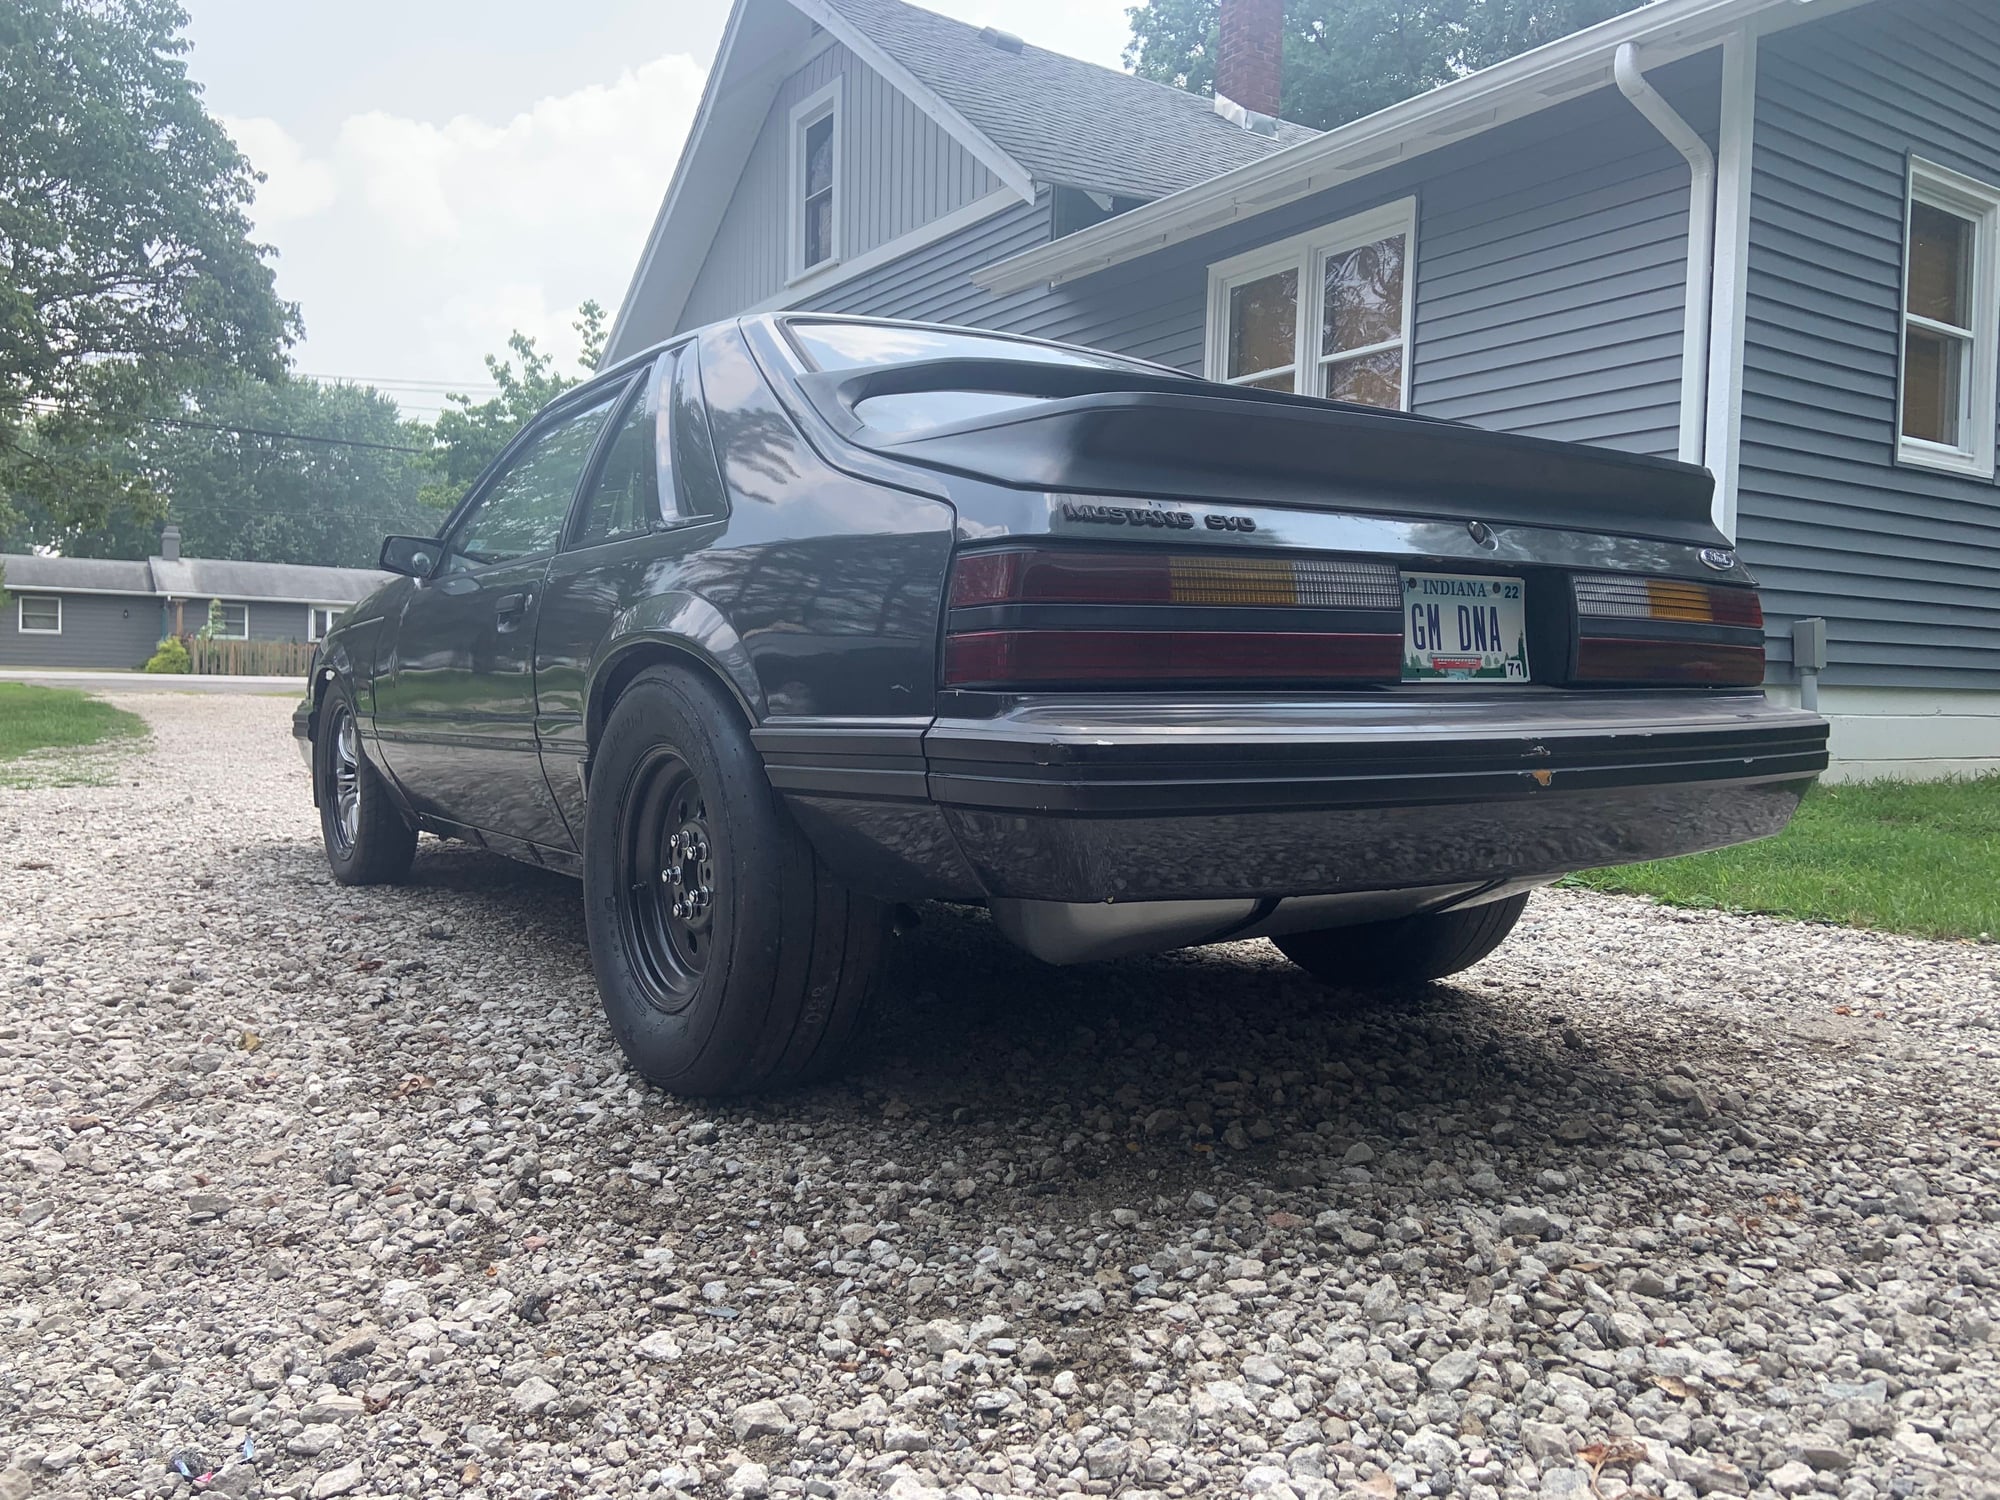 1984 Ford Mustang - 1984 mustang SVO LS swap - Used - VIN 1FABP28T7EF175726 - 1,111,111 Miles - 8 cyl - 2WD - Manual - Hatchback - Gray - Mishawaka, IN 46561, United States